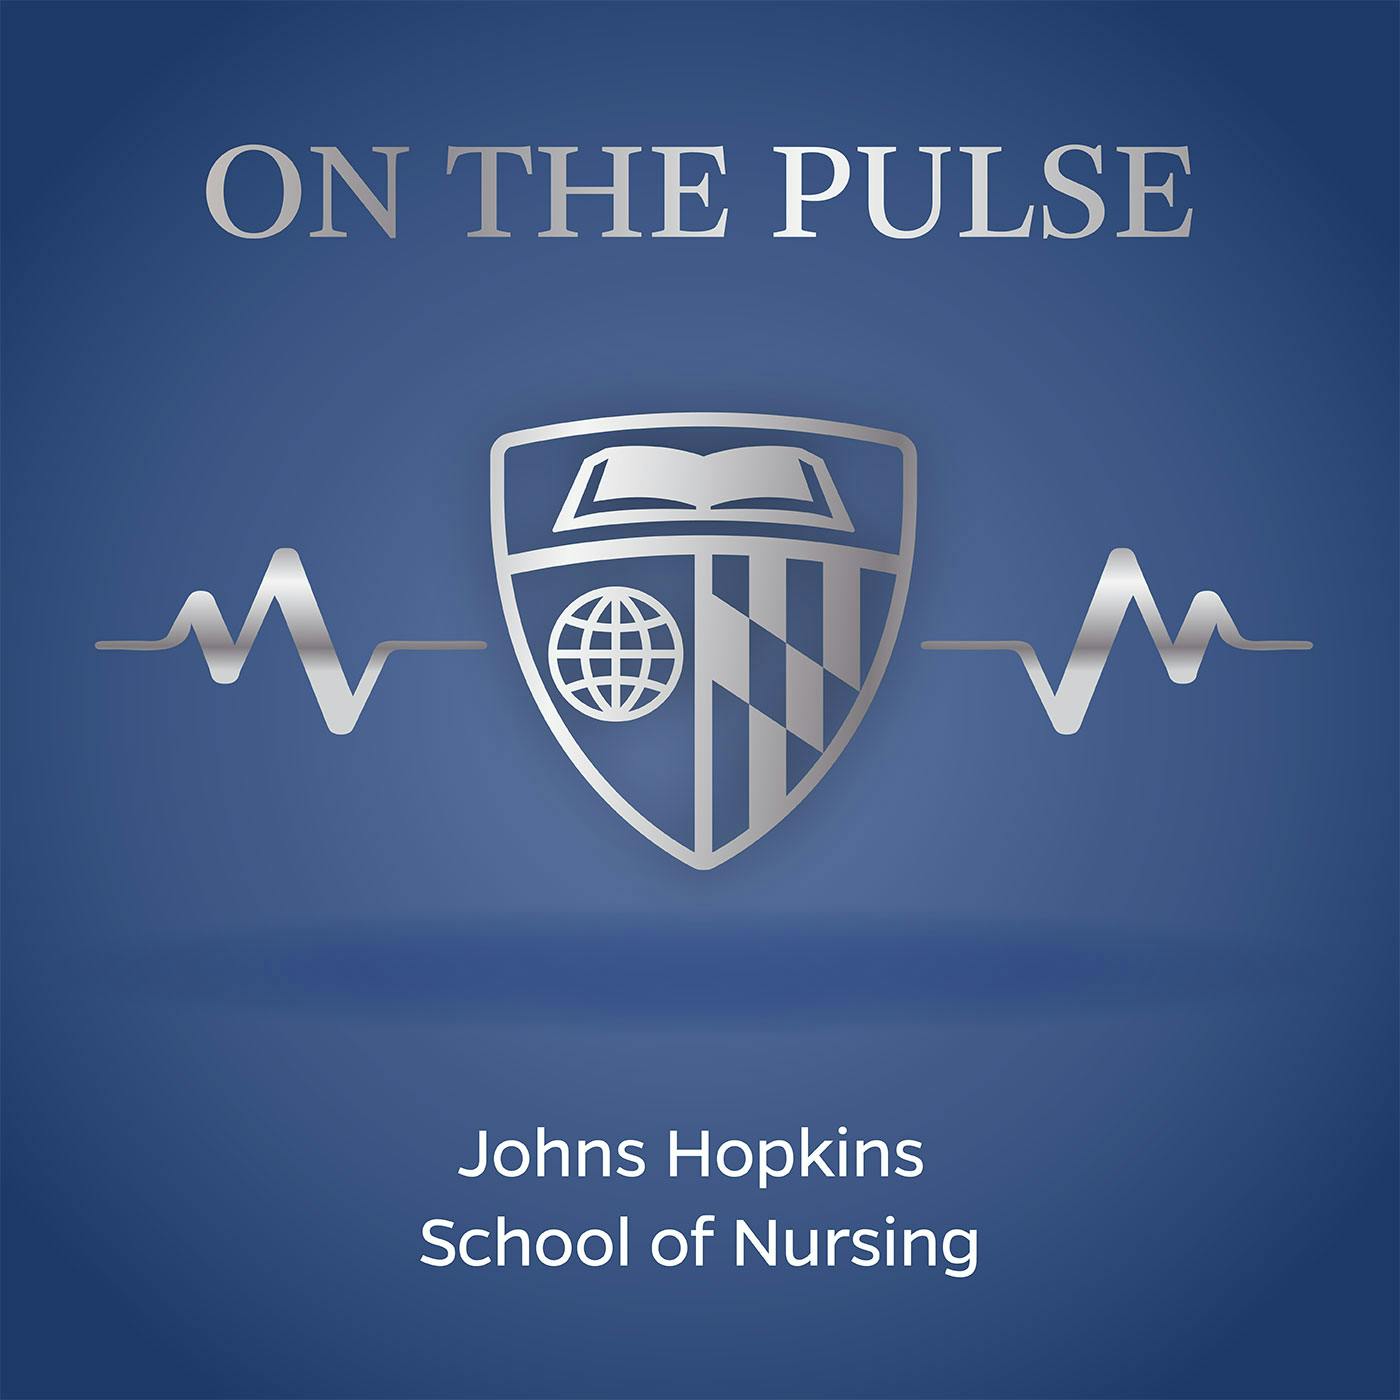 Welcome to On the Pulse: A Johns Hopkins School of Nursing Podcast